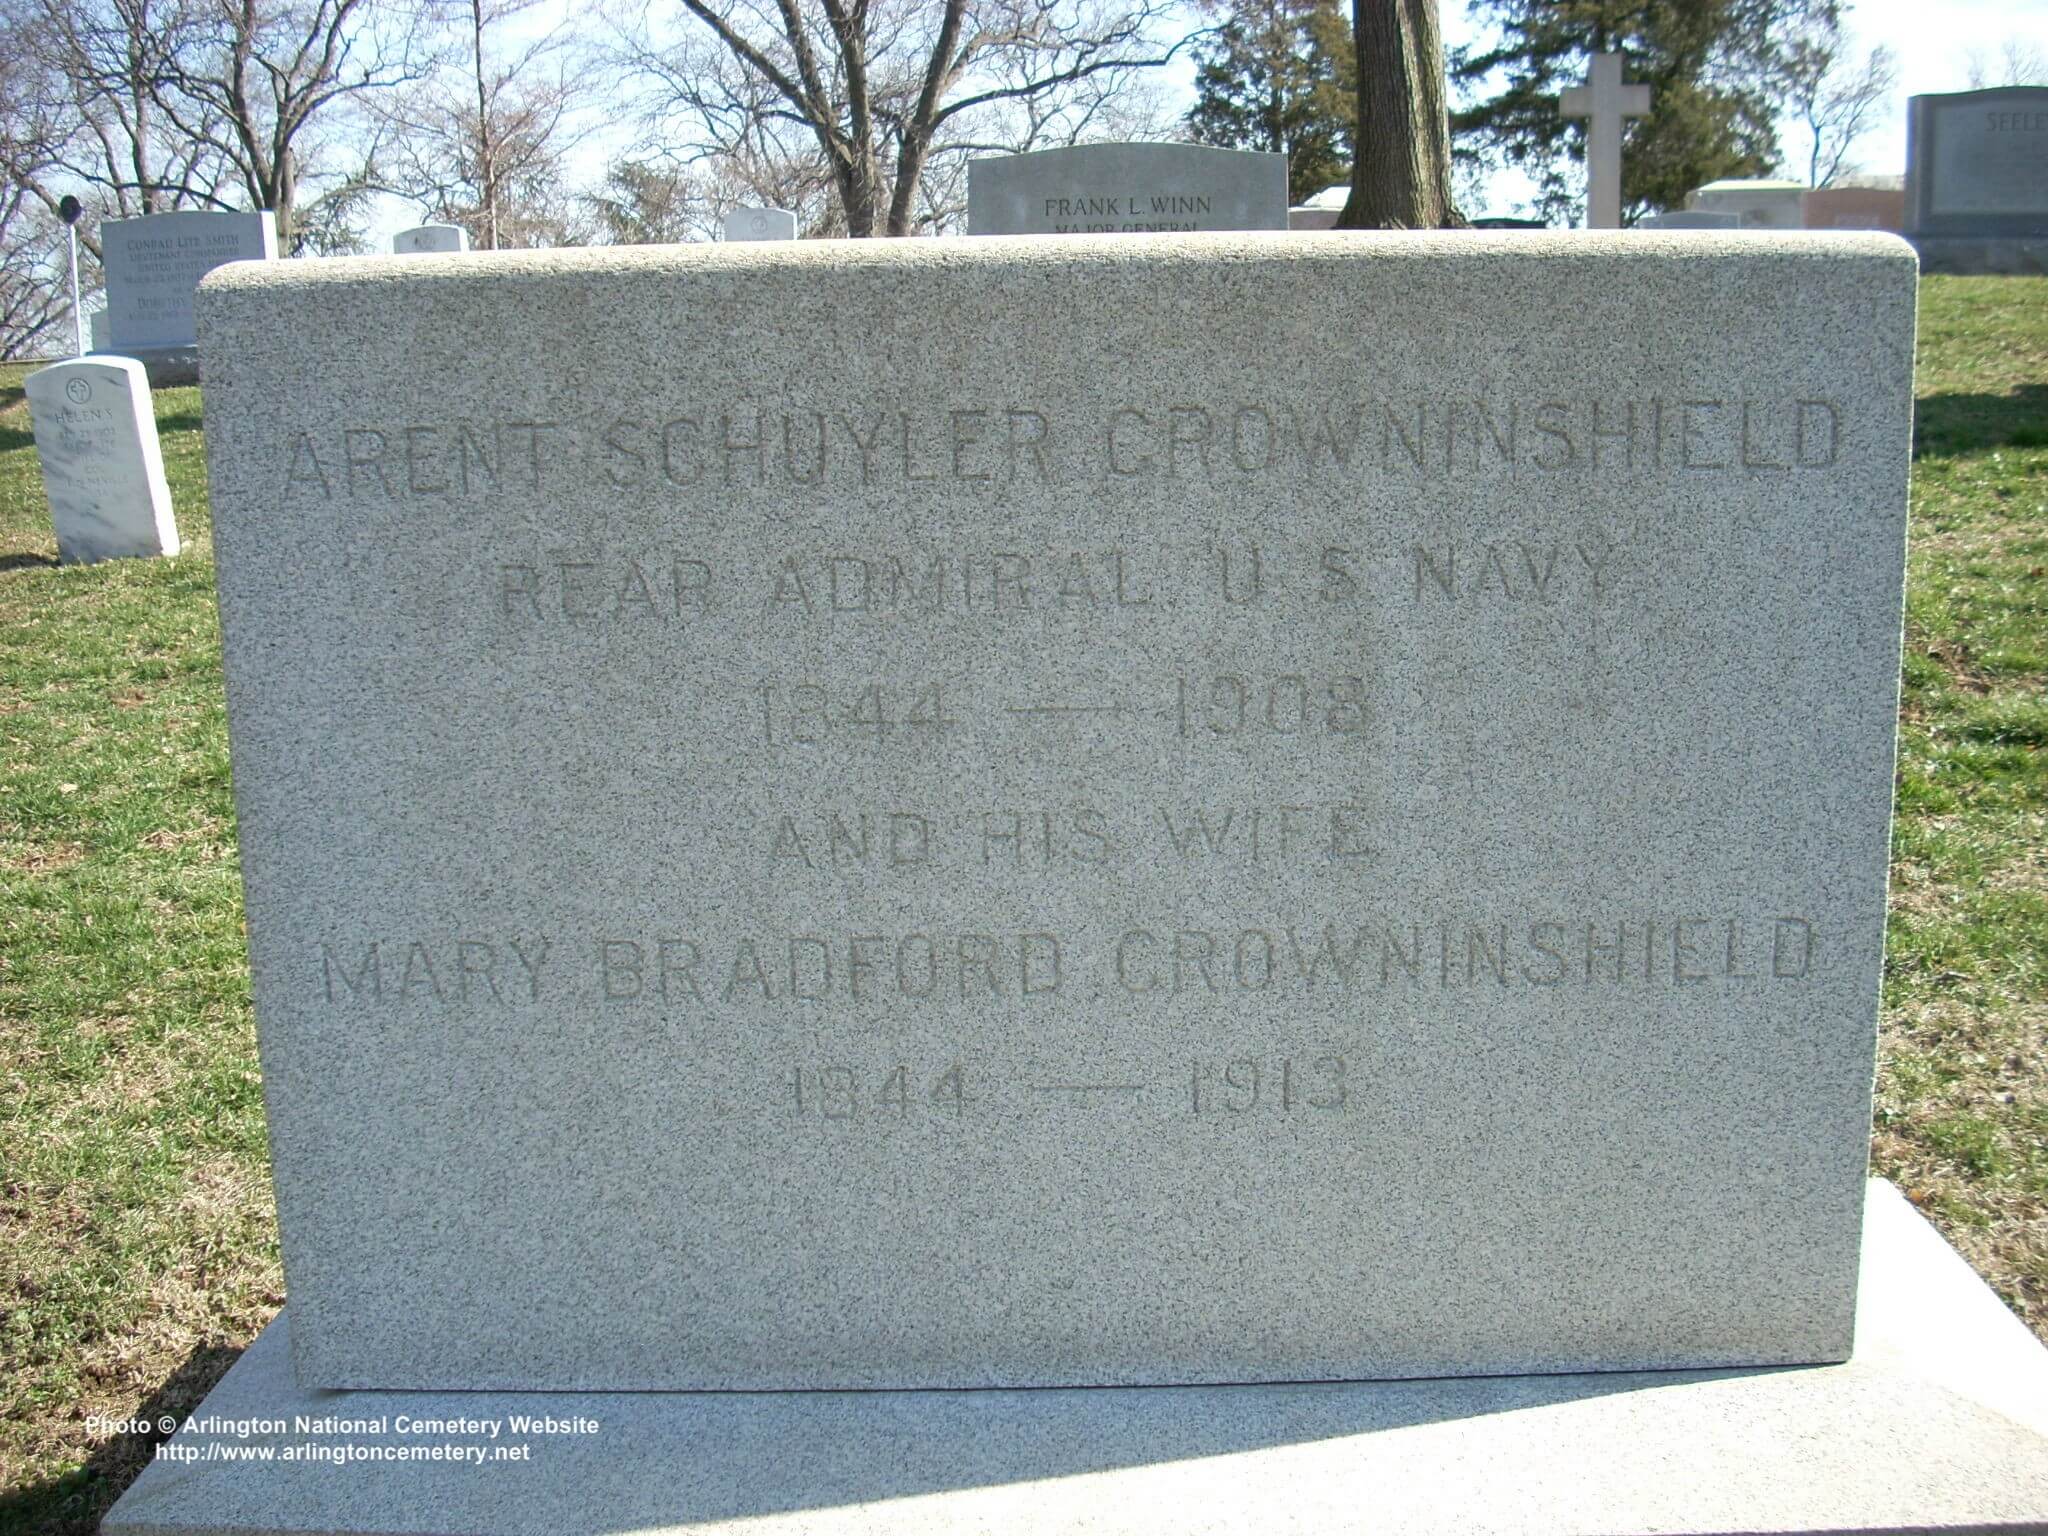 ascrowninshield-gravesite-photo-march-2008-001